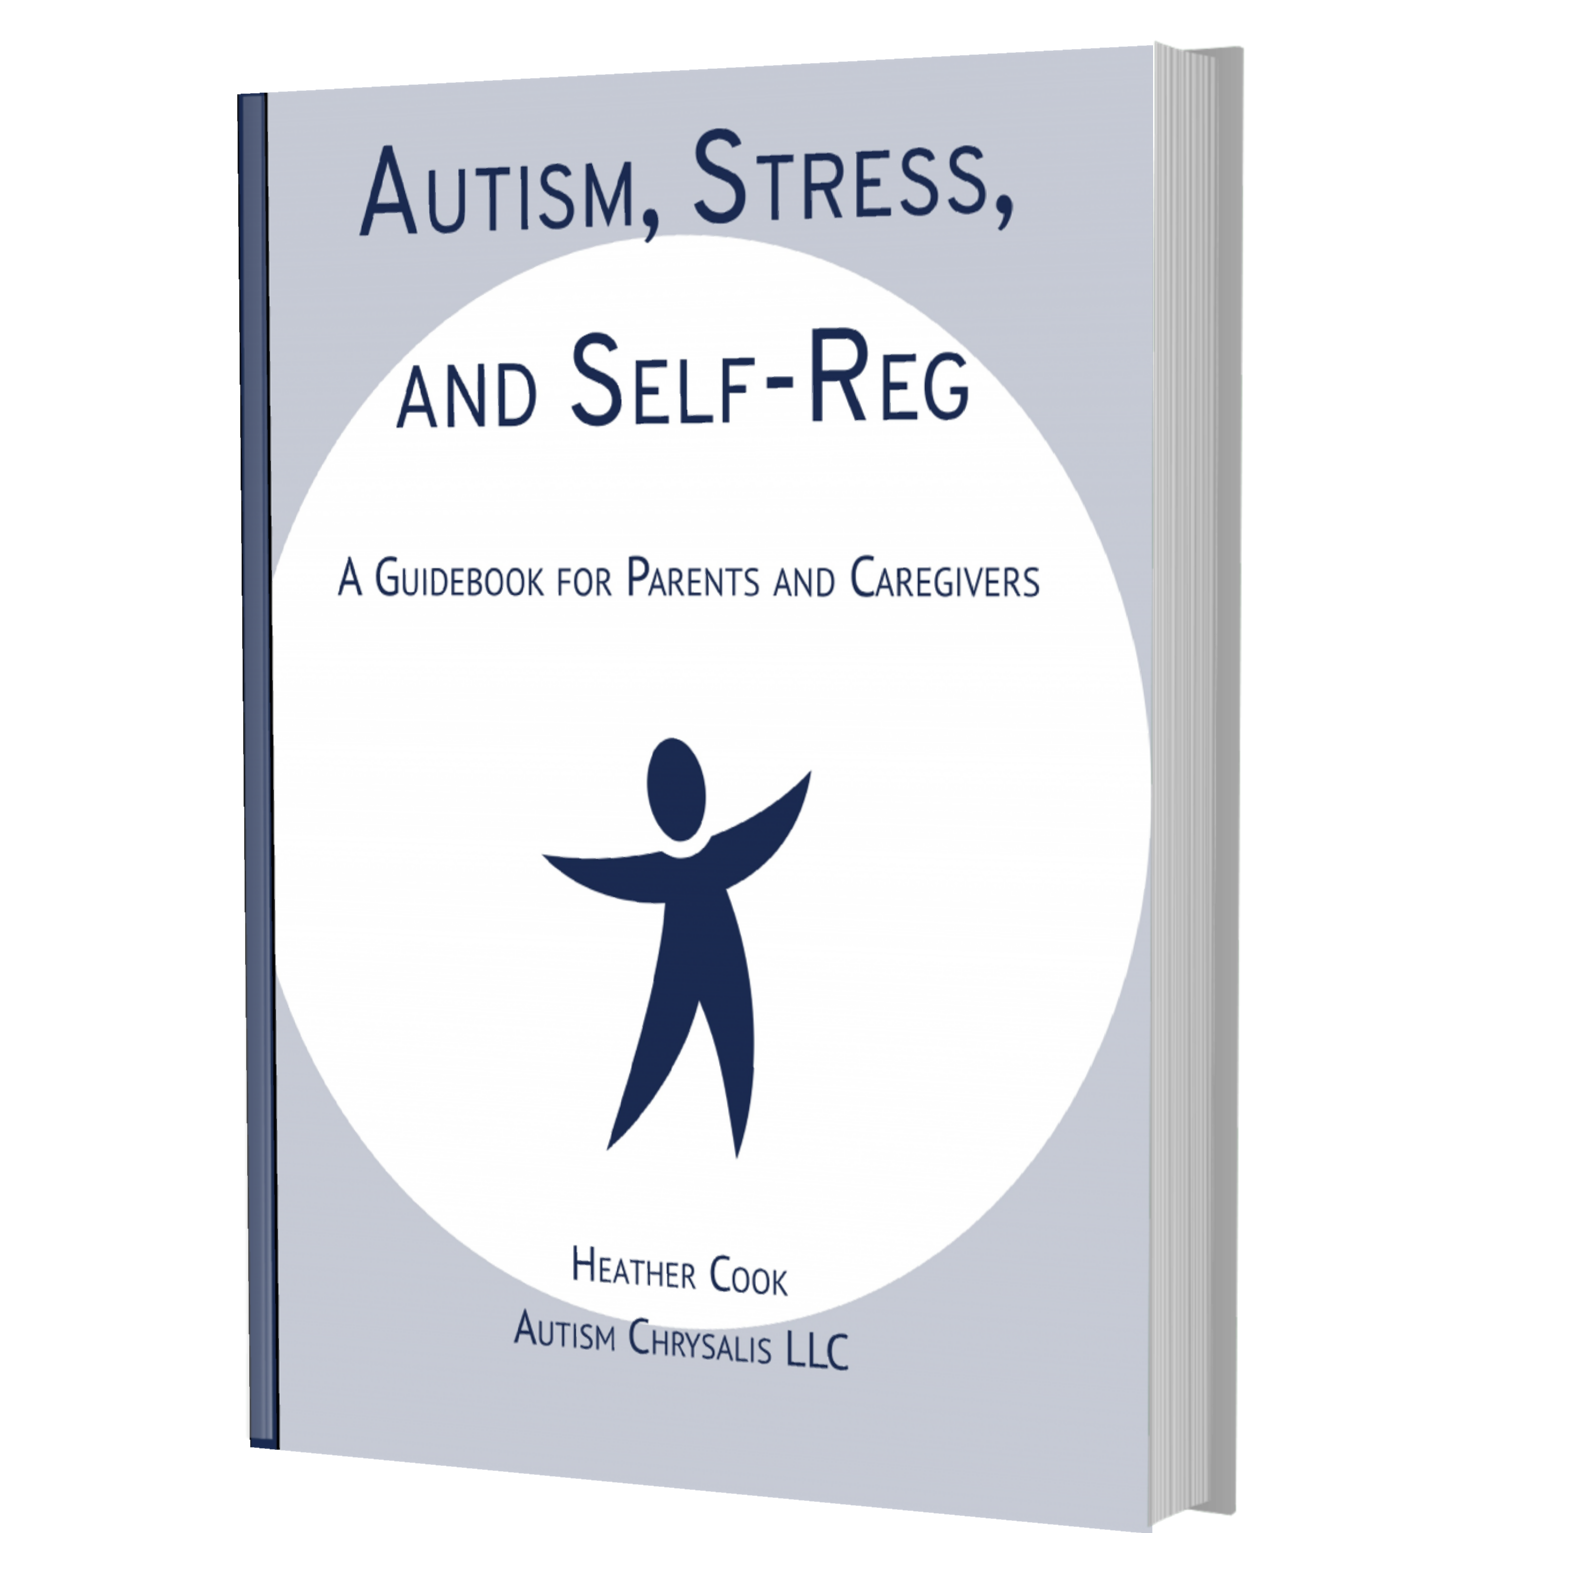 Autism, Stress, and Self-Reg: A Guidebook for Parents and Caregivers